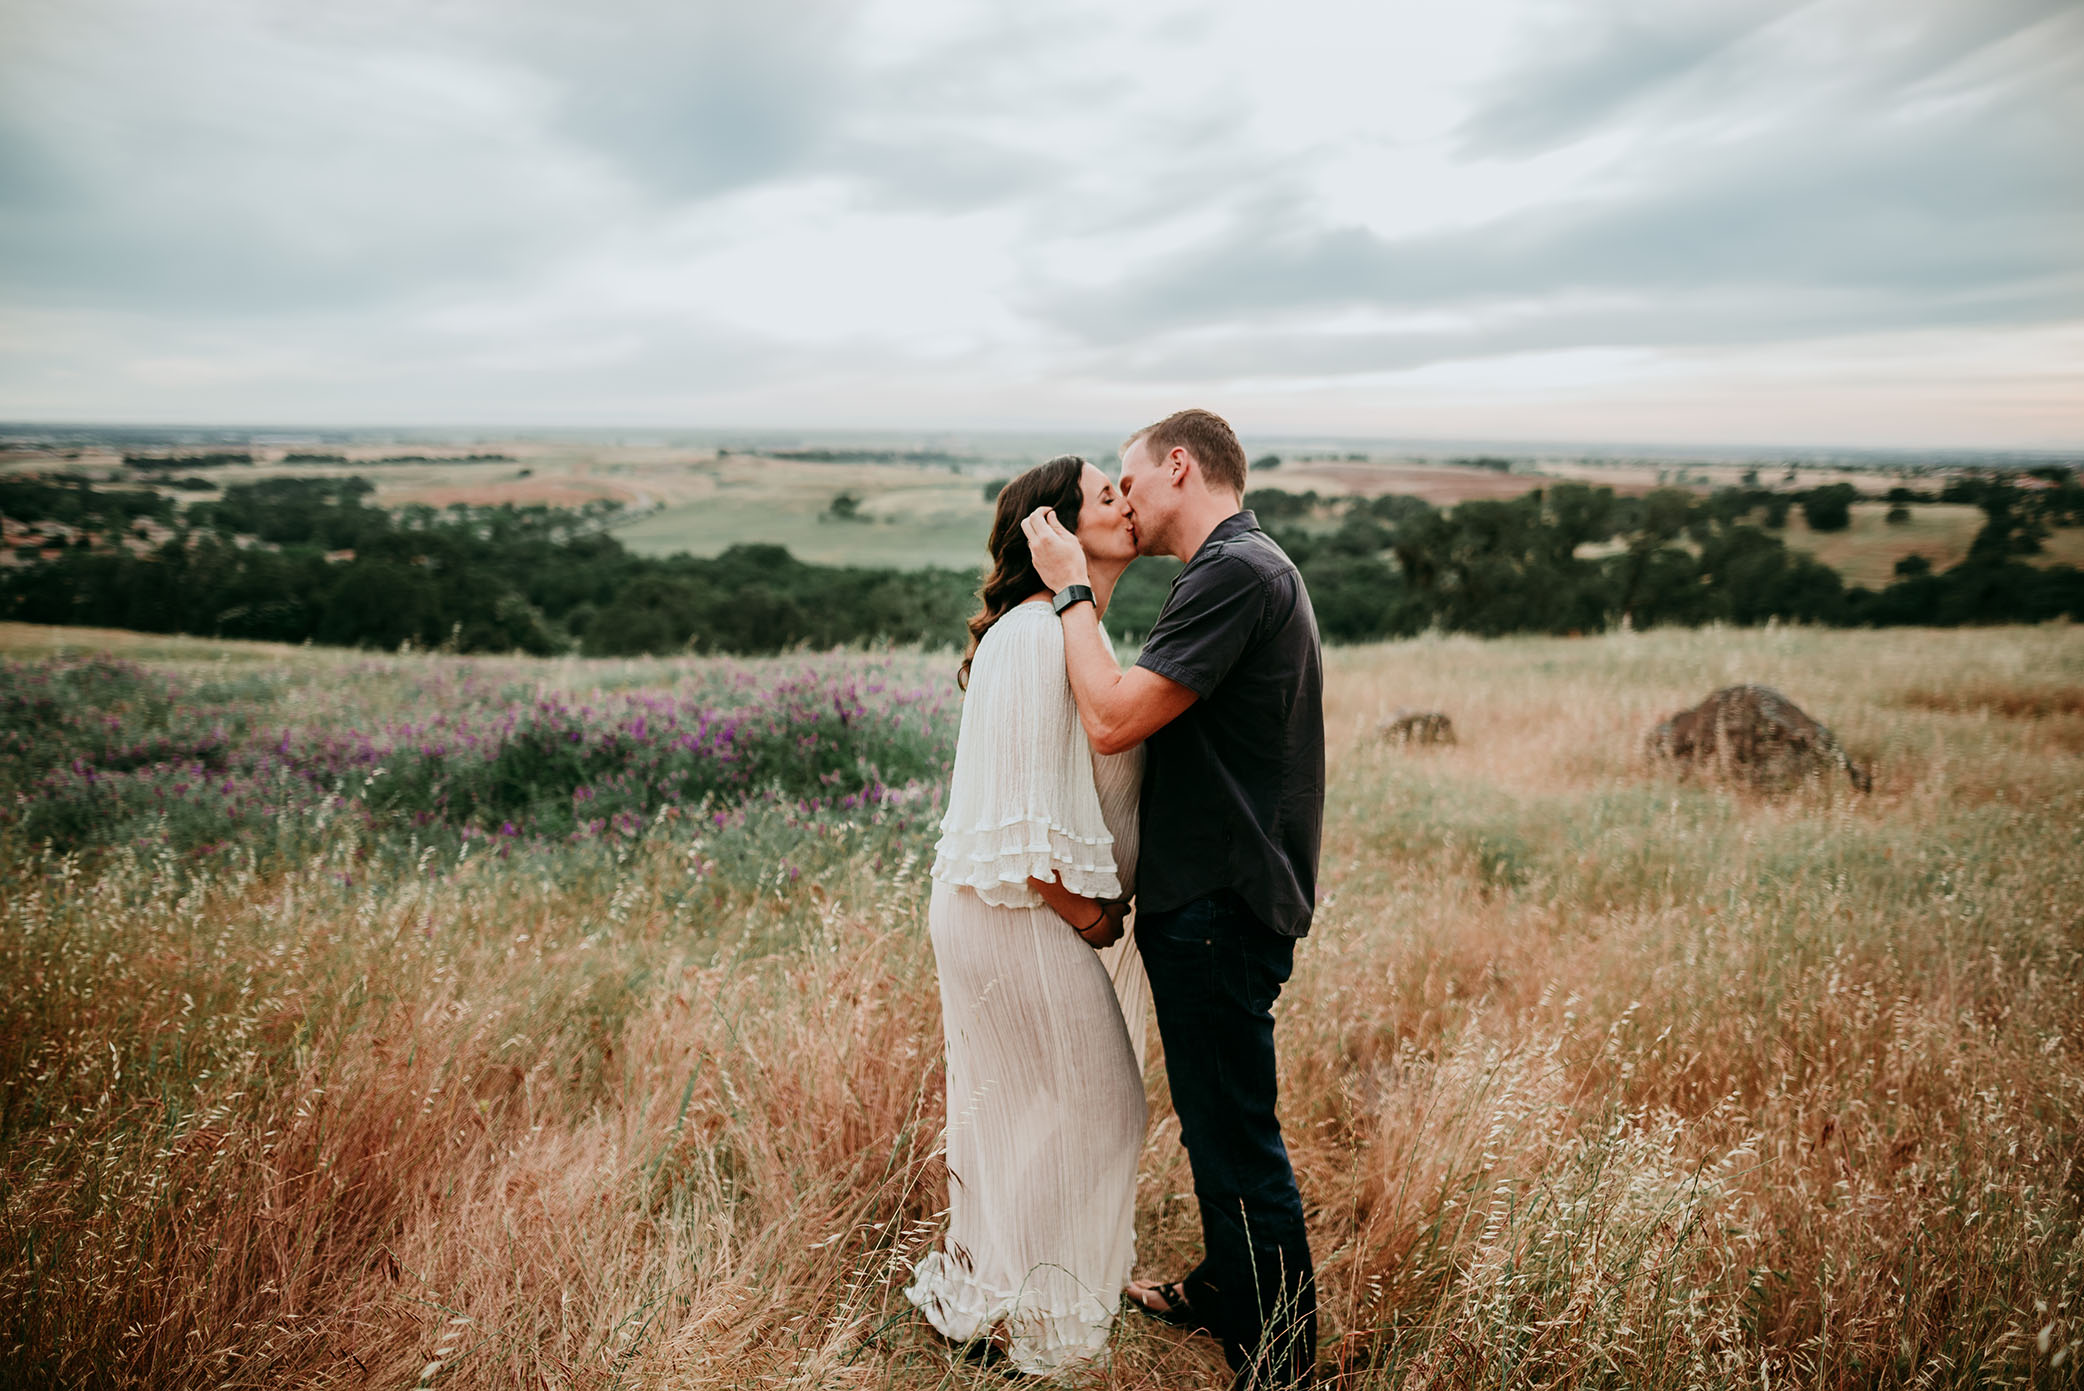 A maternity kiss before sunset captured by Sweet Beginnings Photography by Stephanie